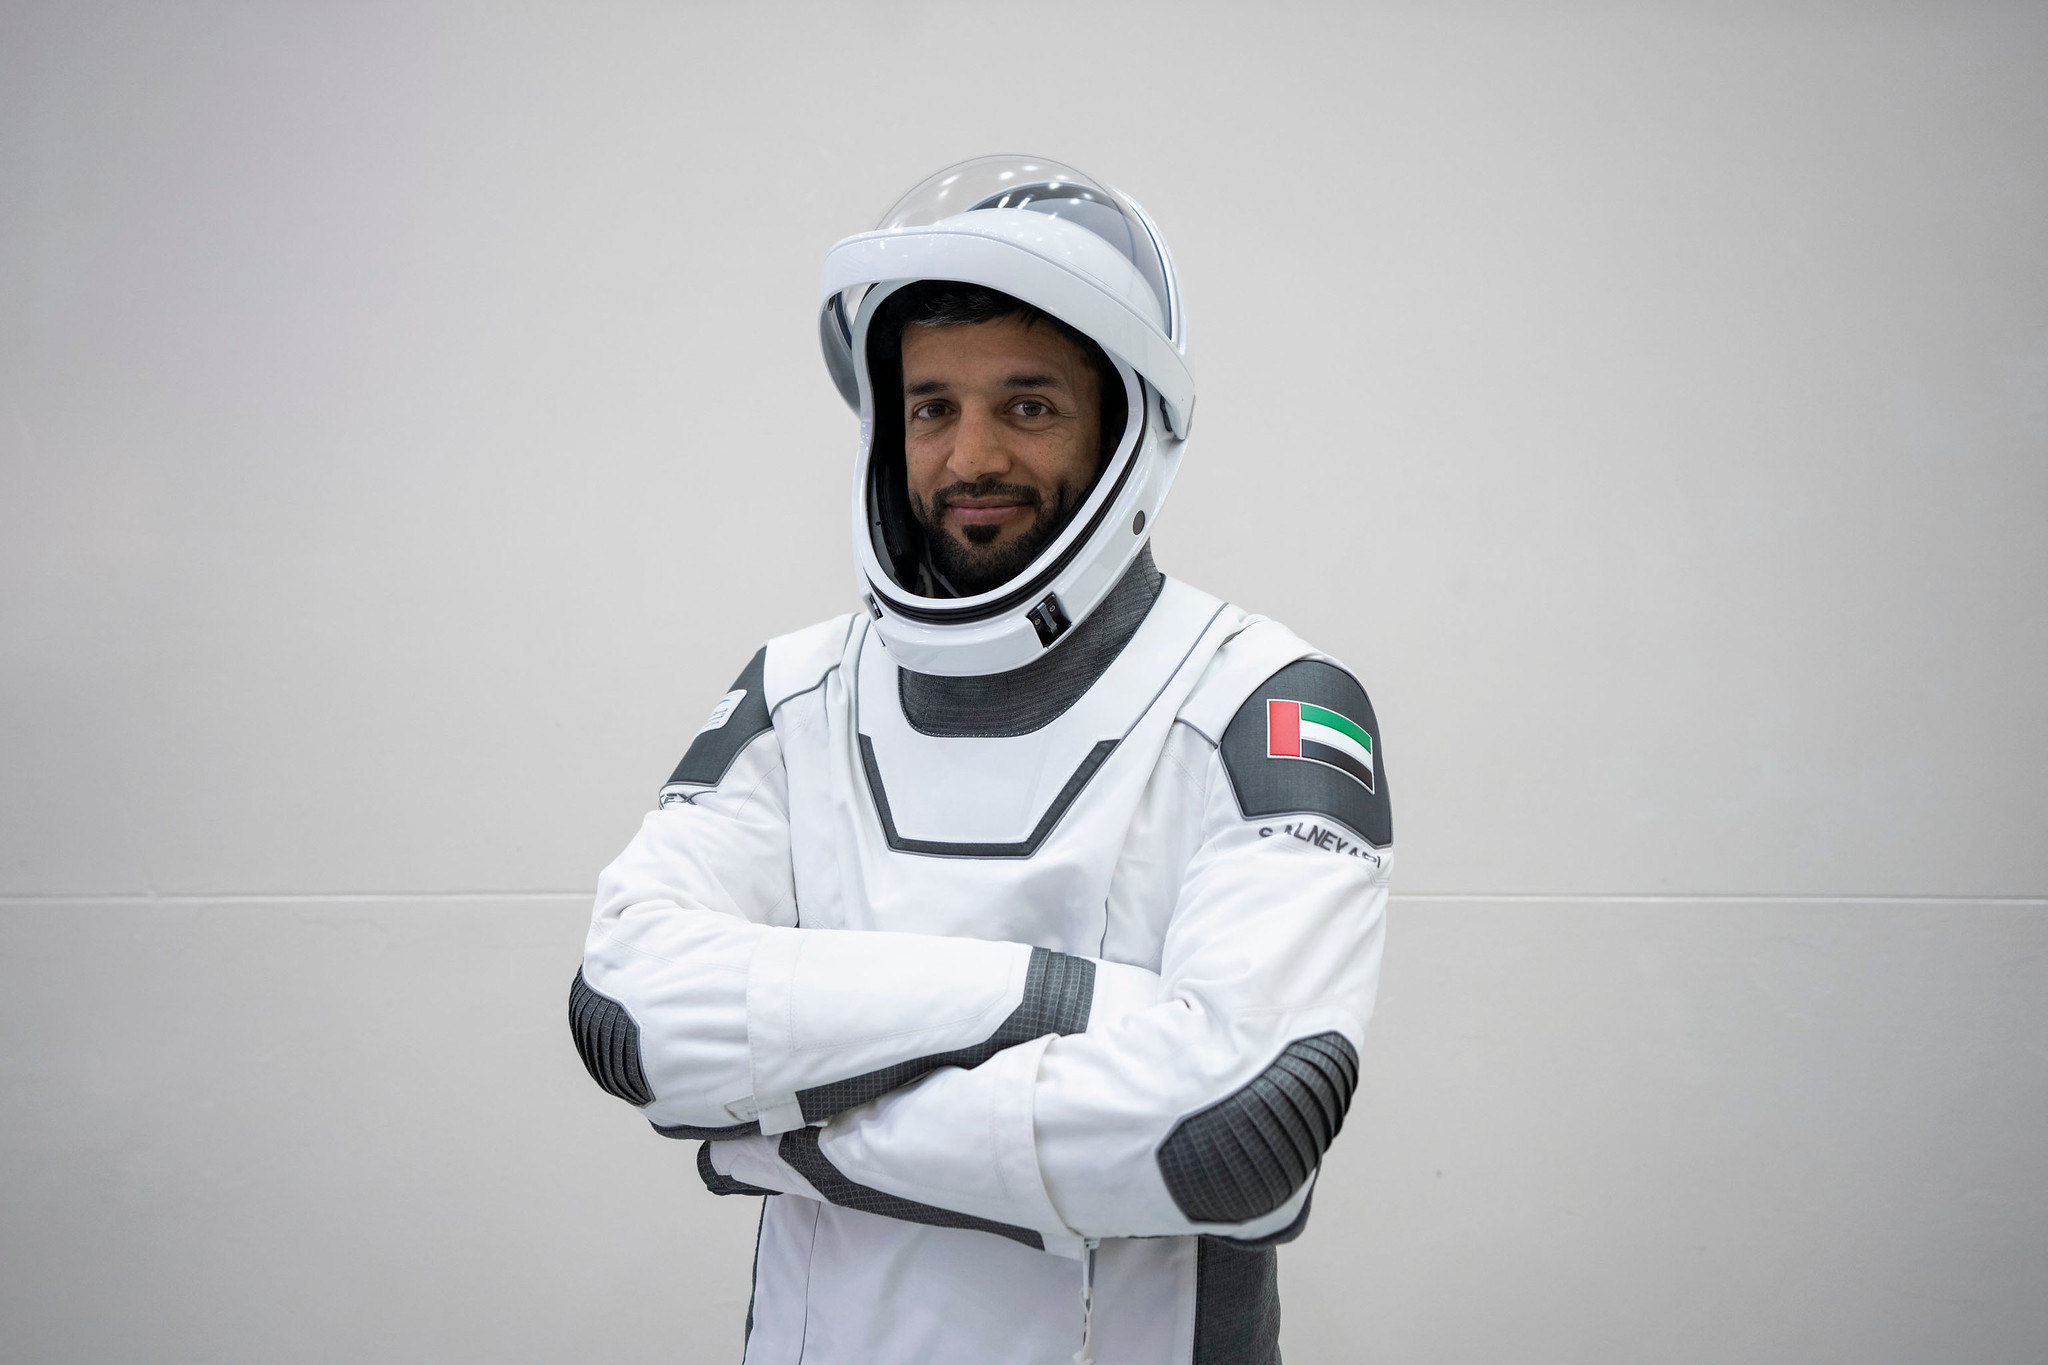 sultan al-neyadi stands with his arms crossed in a space suit